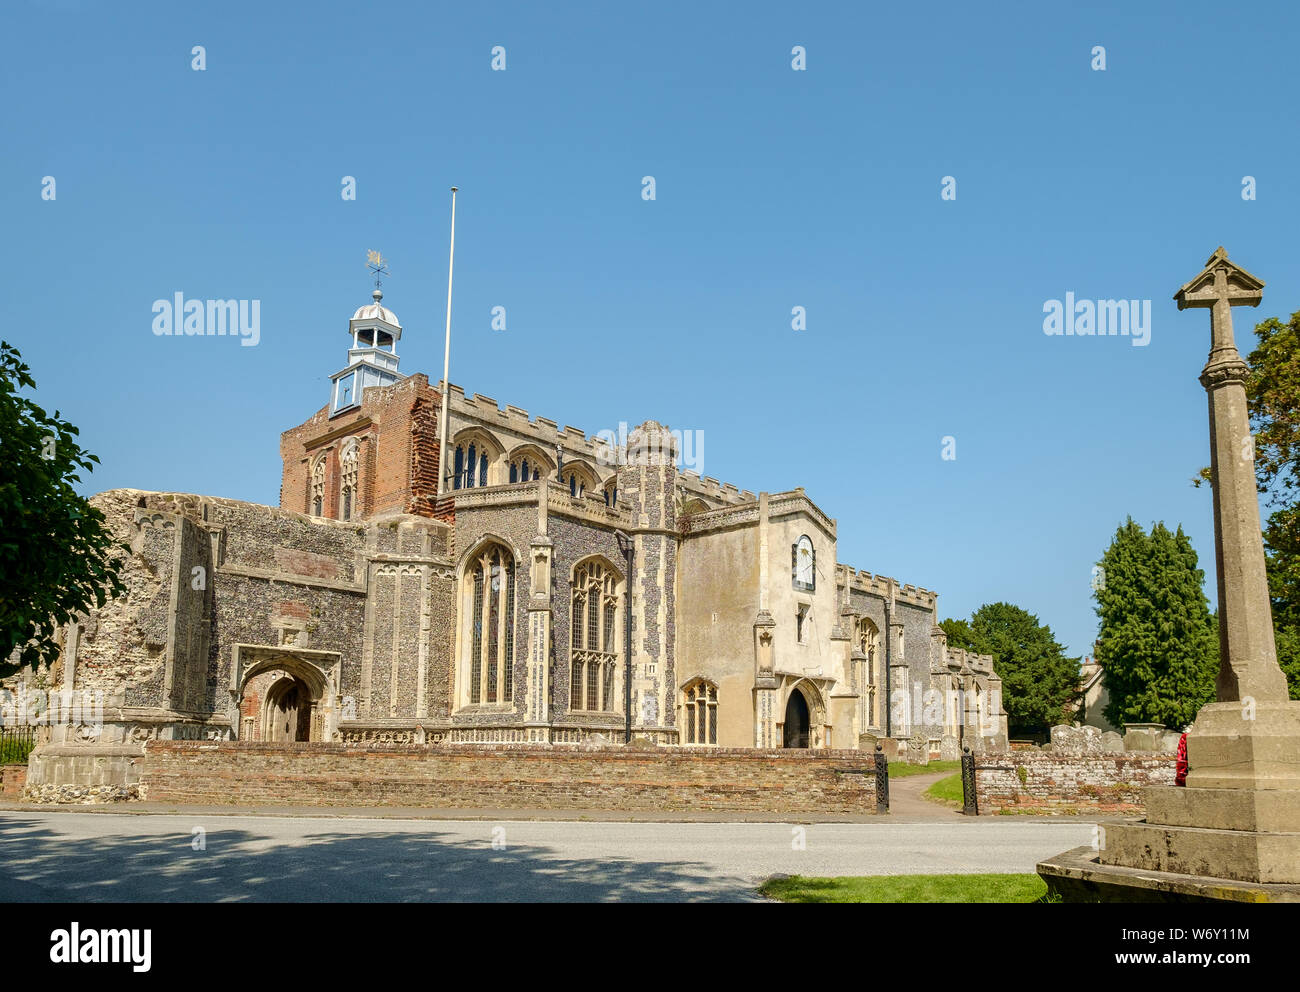 Eglise St Mary the Virgin, East Bergholt Banque D'Images